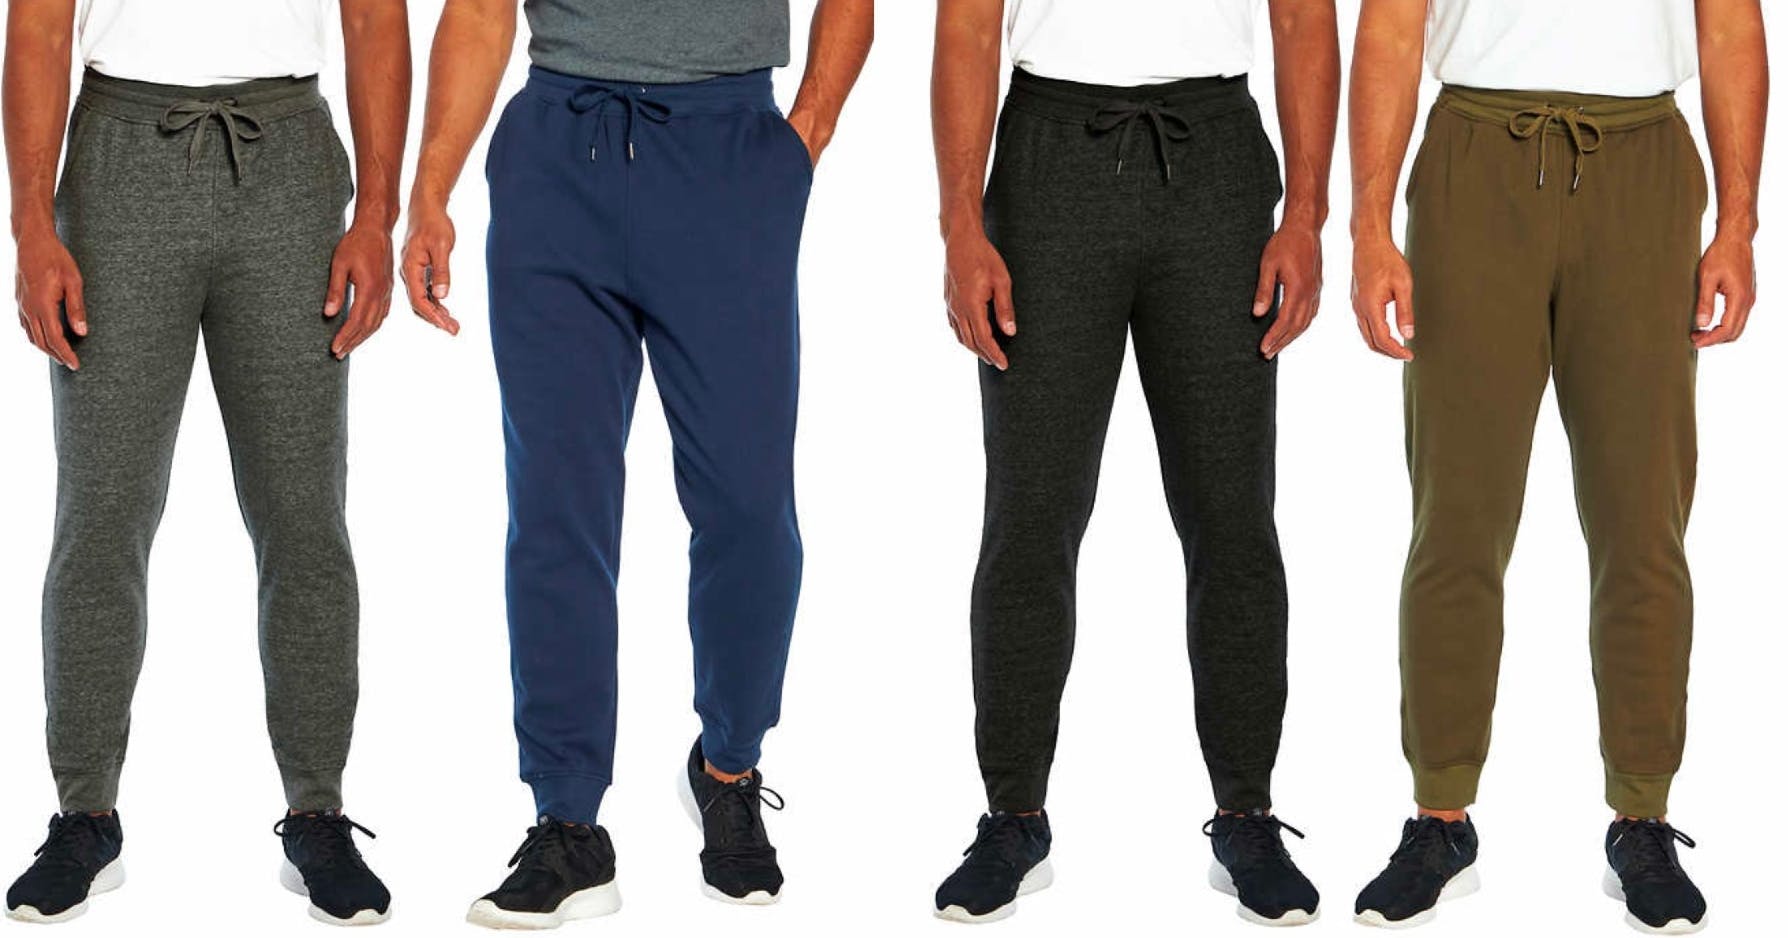 Orvis Fleece-Lined Joggers, as Low as $3 Each at Costco - The Krazy ...